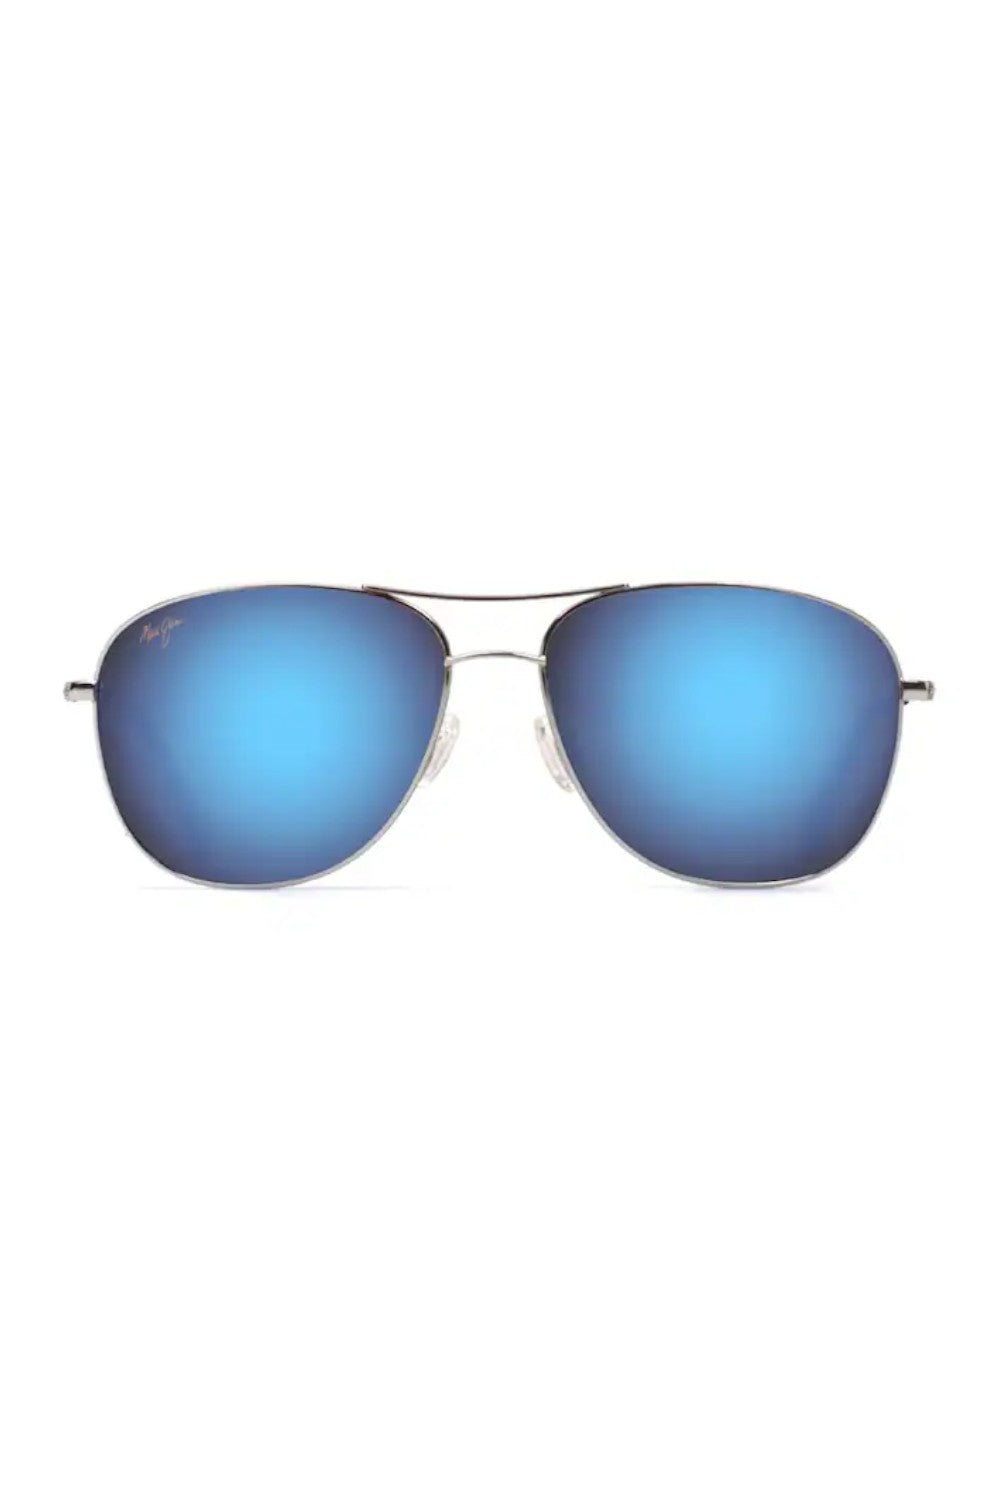 Located at the top of Waipi`o Valley on the Big Island, Cliff House provides unprecedented, panoramic views of Hawaii's natural beauty. Like their namesake, these classic aviators from Maui Jim come with polarized lenses that offer bright, clear views everywhere you look. See all of our men's aviator sunglasses.